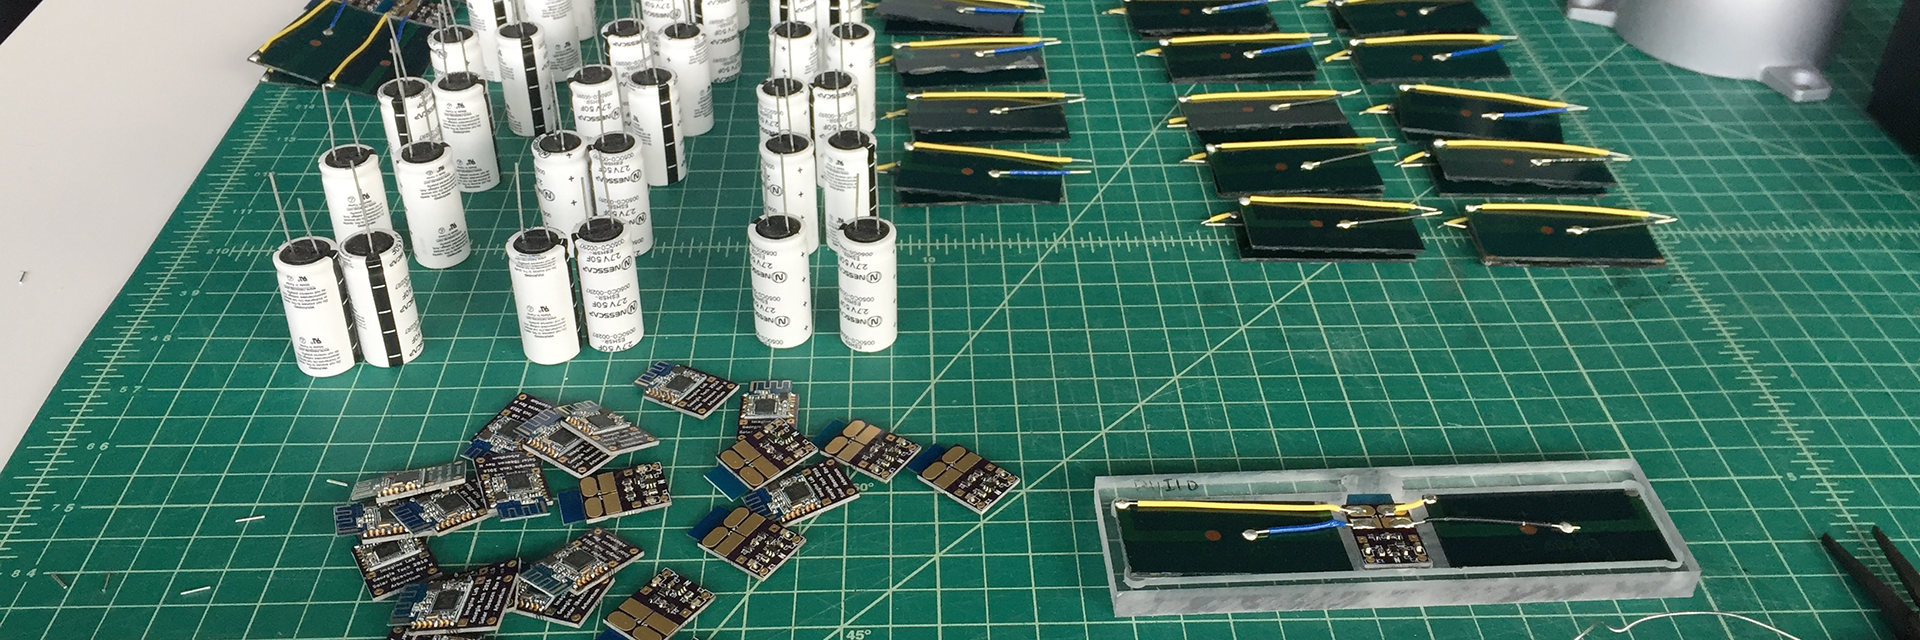 electronic components being assembled 